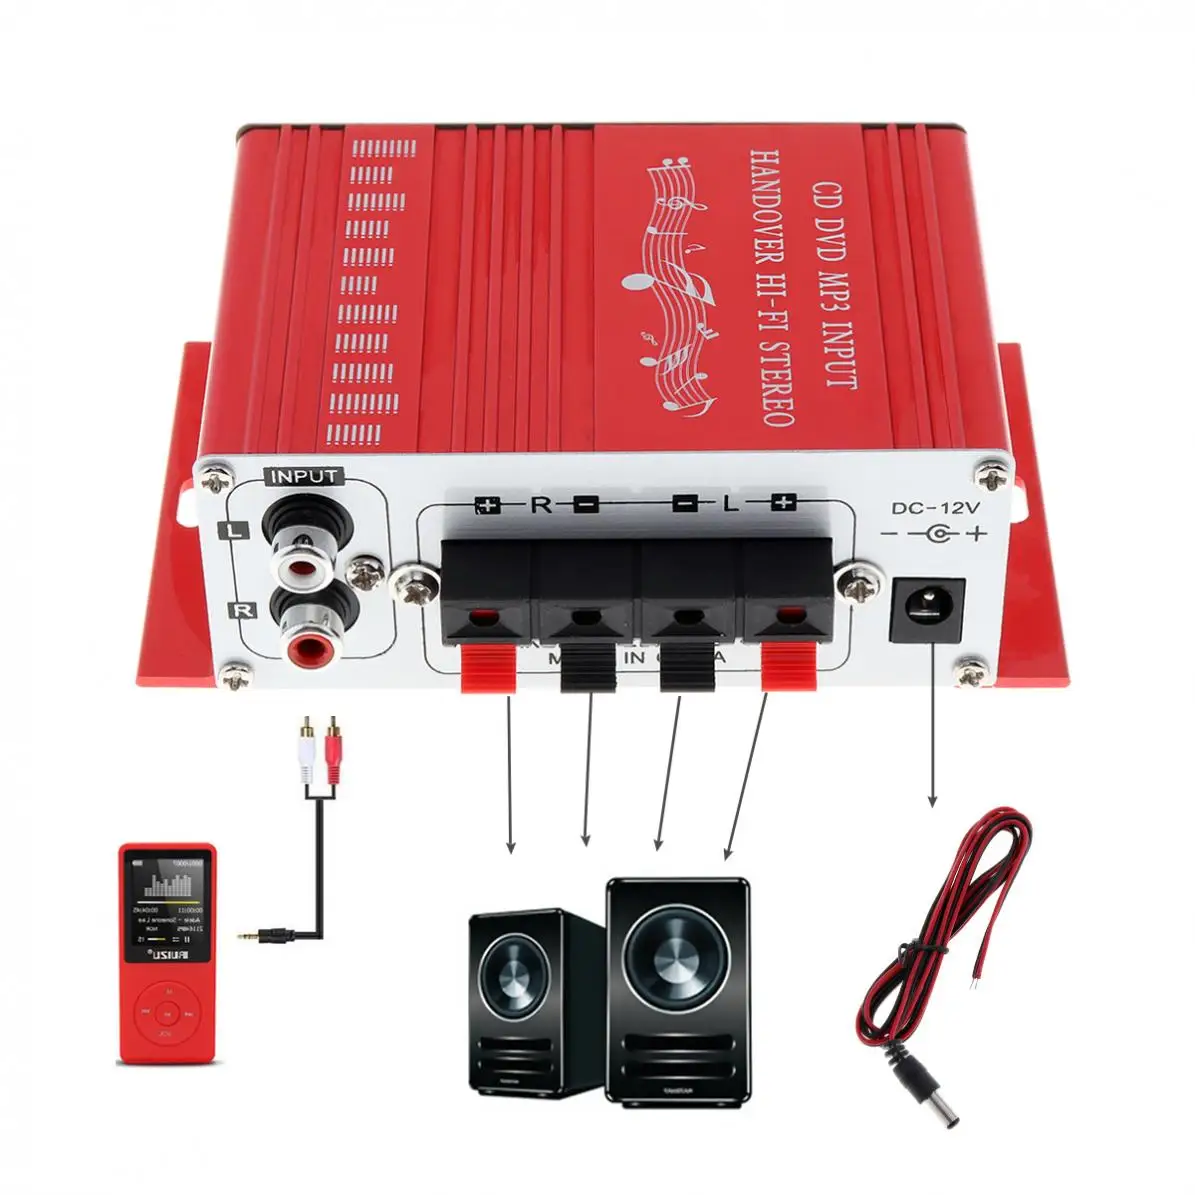 scooter motorcycle DRALL INSTRUMENTS Mini power amplifier for Flats car mp3 player RED Model: EN4R 